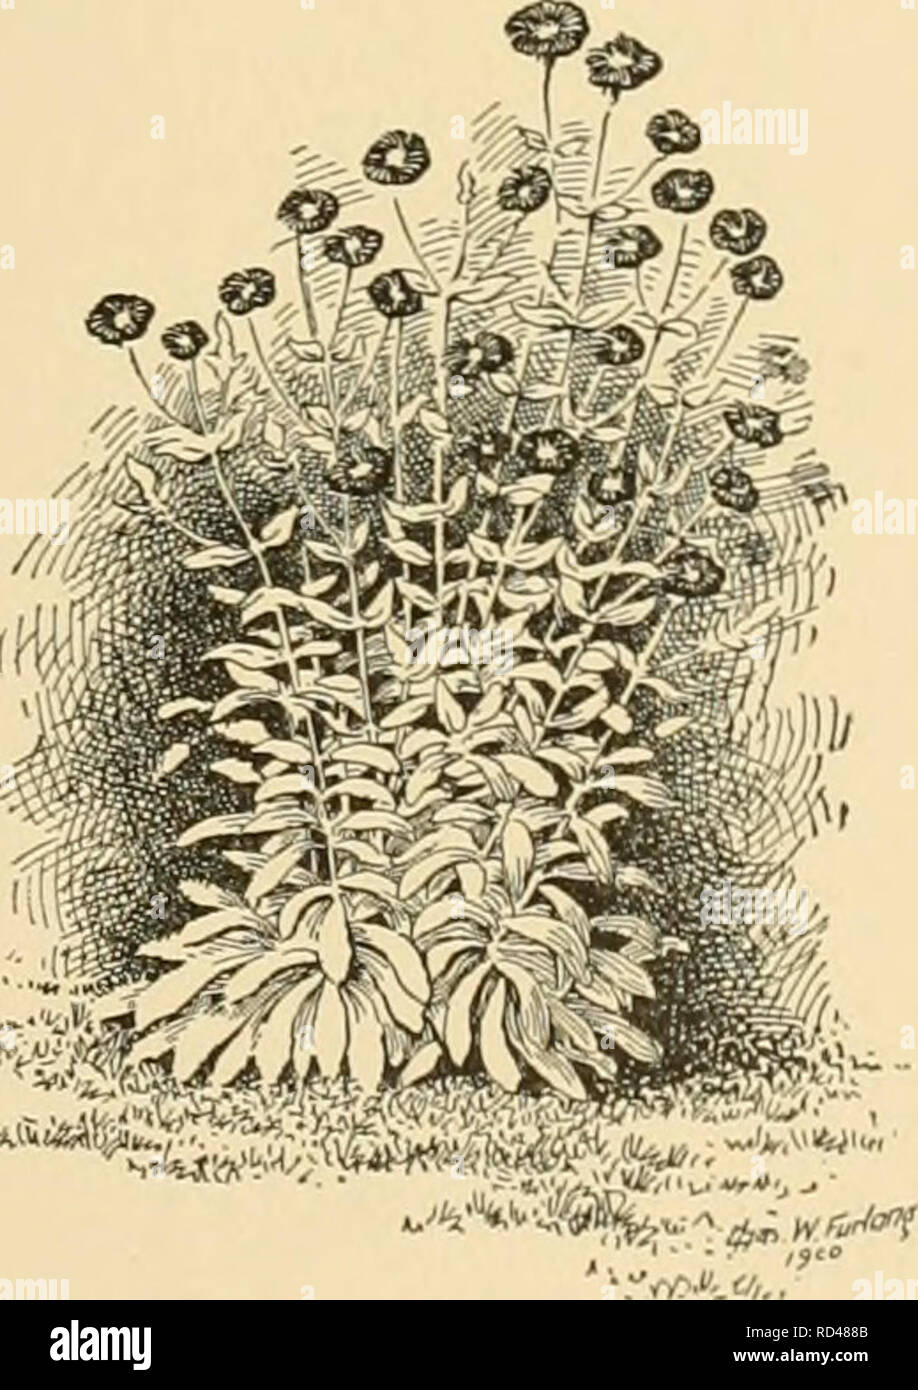 . Cyclopedia of American horticulture : comprising suggestions for cultivation of horticultural plants, descriptions of the species of fruits, vegetables, flowers, and ornamental plants sold in the United States and Canada, together with geographical and biographical sketches. Gardening; Horticulture; Horticulture; Horticulture. 1331. Lychnis Chalcedonica. CO. Plant not n-hit Petals S-notchcd or S-cleff woolly, green. (Forms of No. 12 may be sought here.) 7. Coeli-rosa, Desv. Rose op Heaven. Fig. 1333. A very floriferous annual, 12-18 in., glabrous: Ivs. linear, long-acuminate and very sharp-p Stock Photo